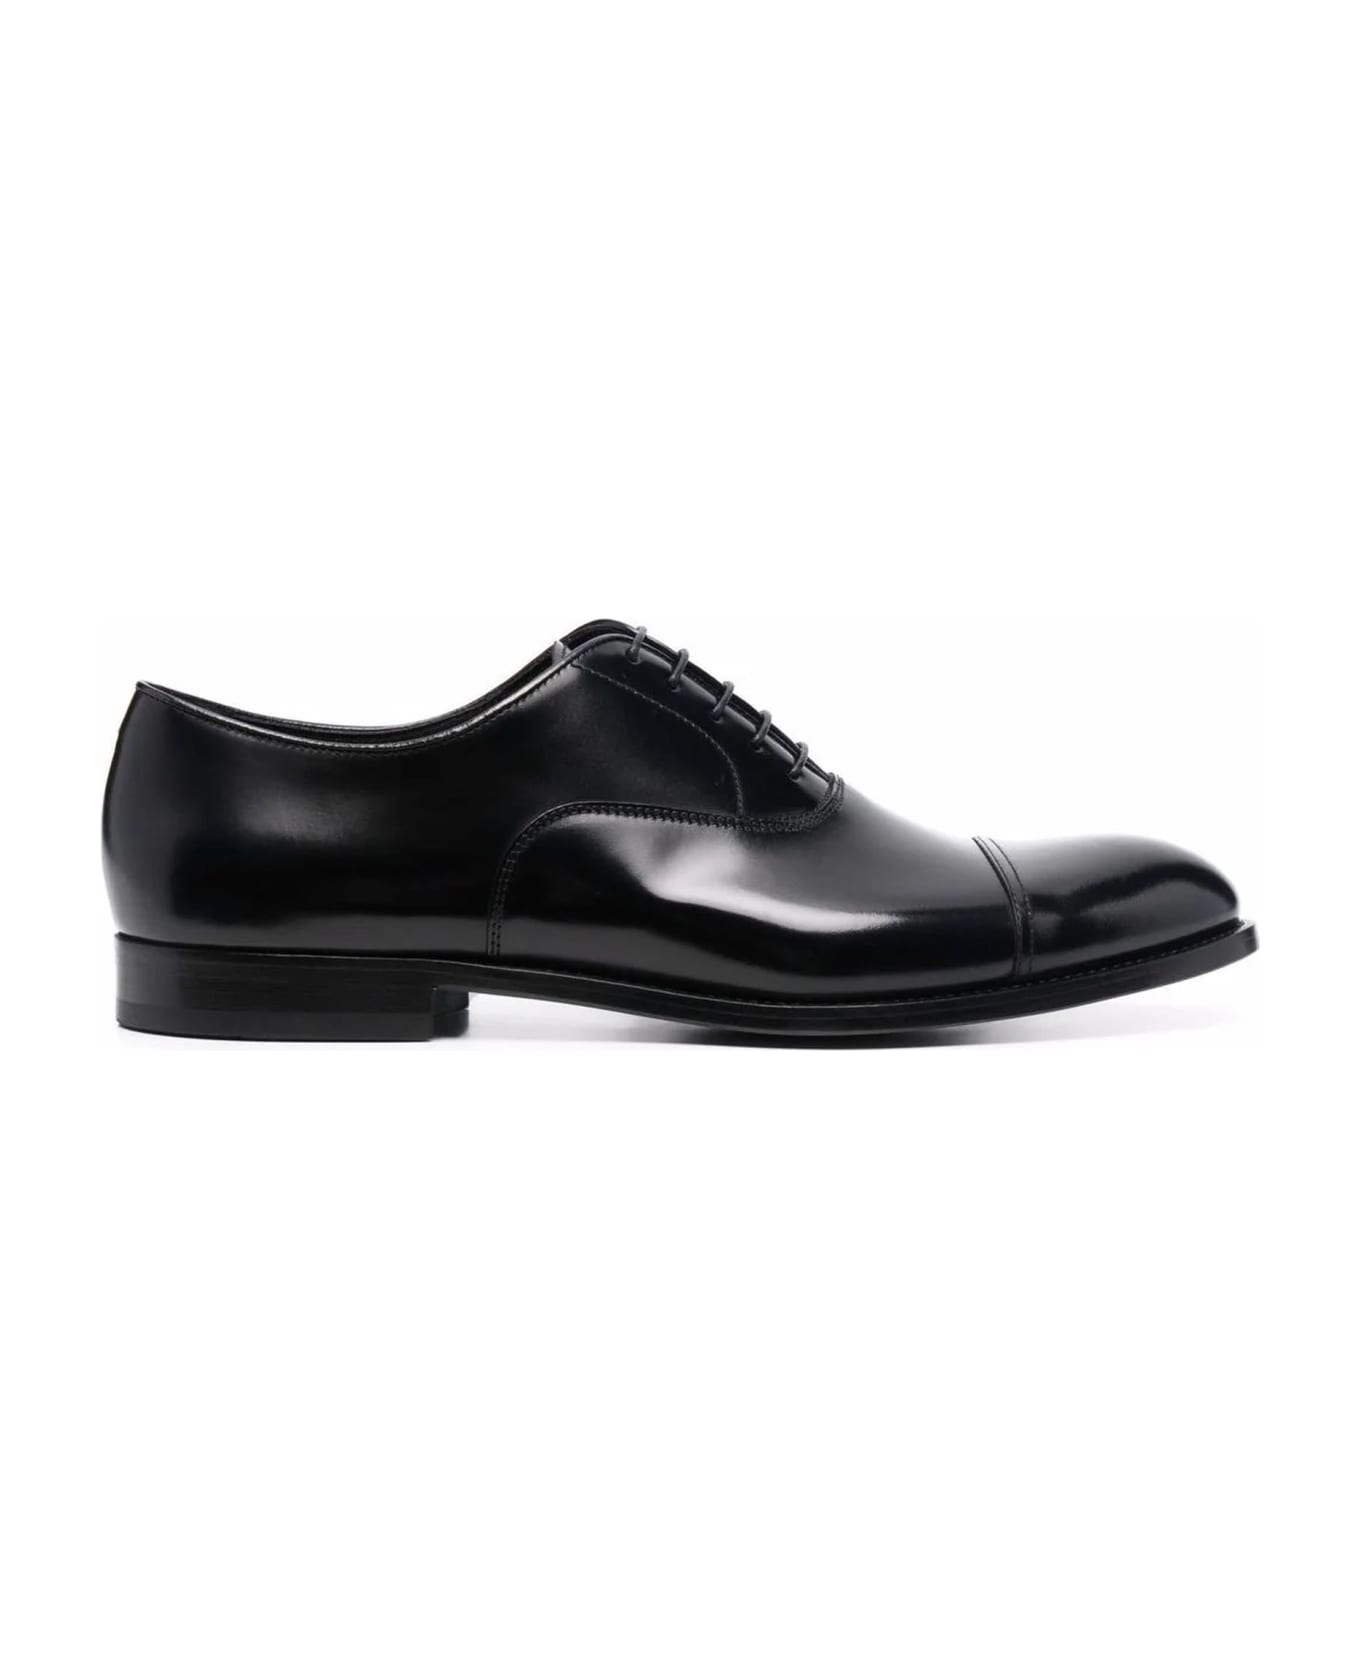 Doucal's Black Leather Lace Up Oxford Shoes - Black